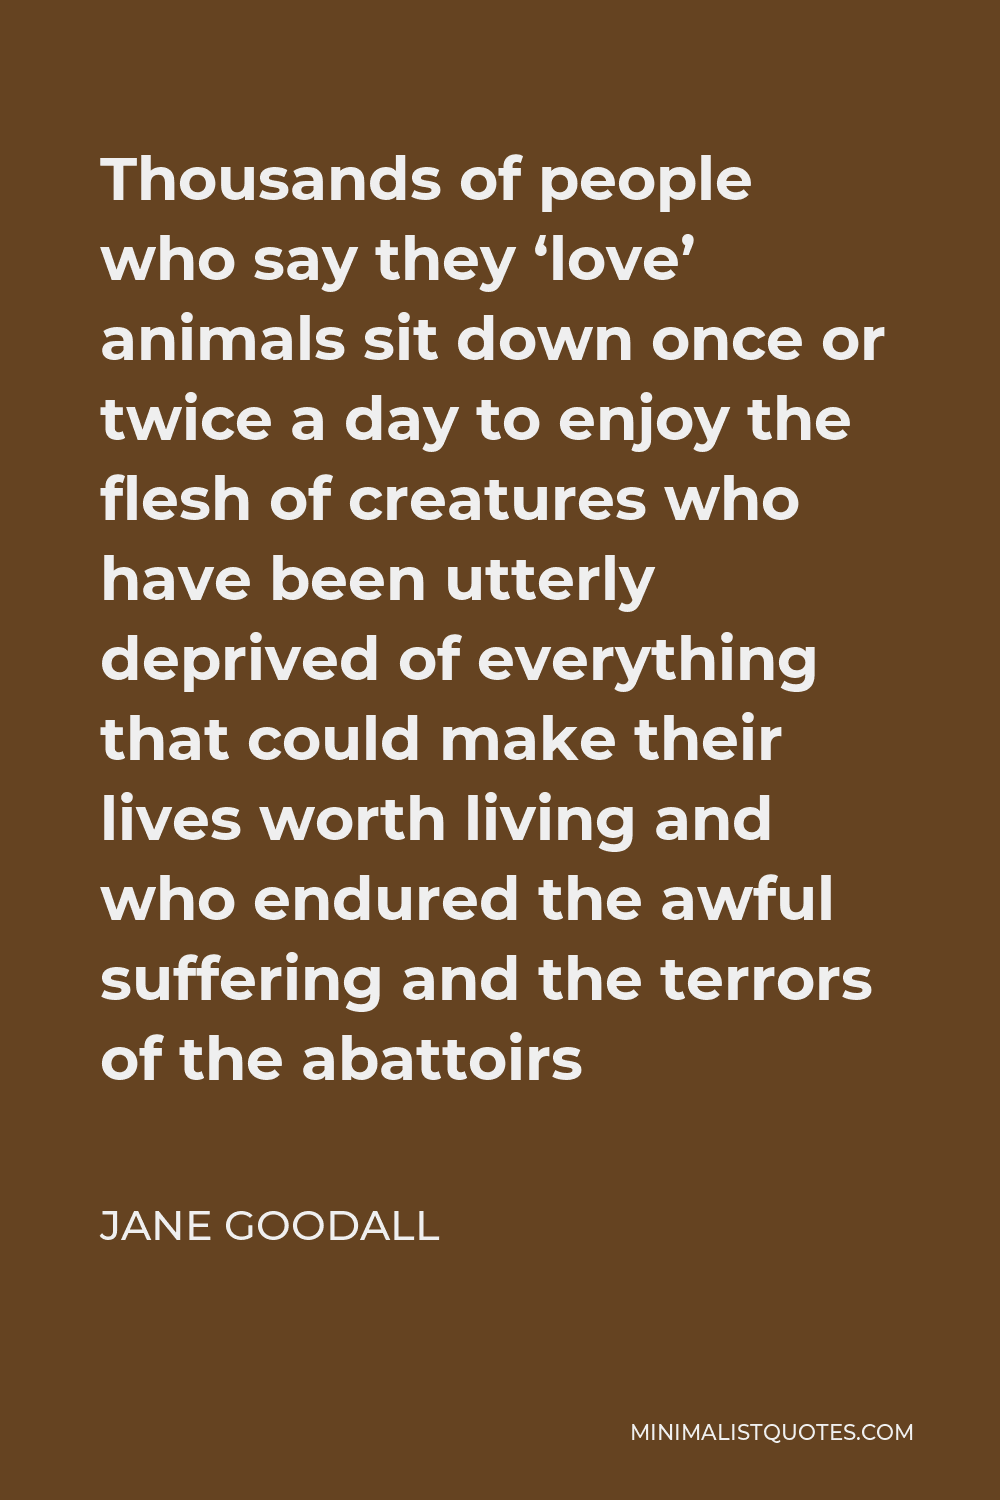 Jane Goodall Quote: Thousands of people who say they 'love' animals sit  down once or twice a day to enjoy the flesh of creatures who have been  utterly deprived of everything that